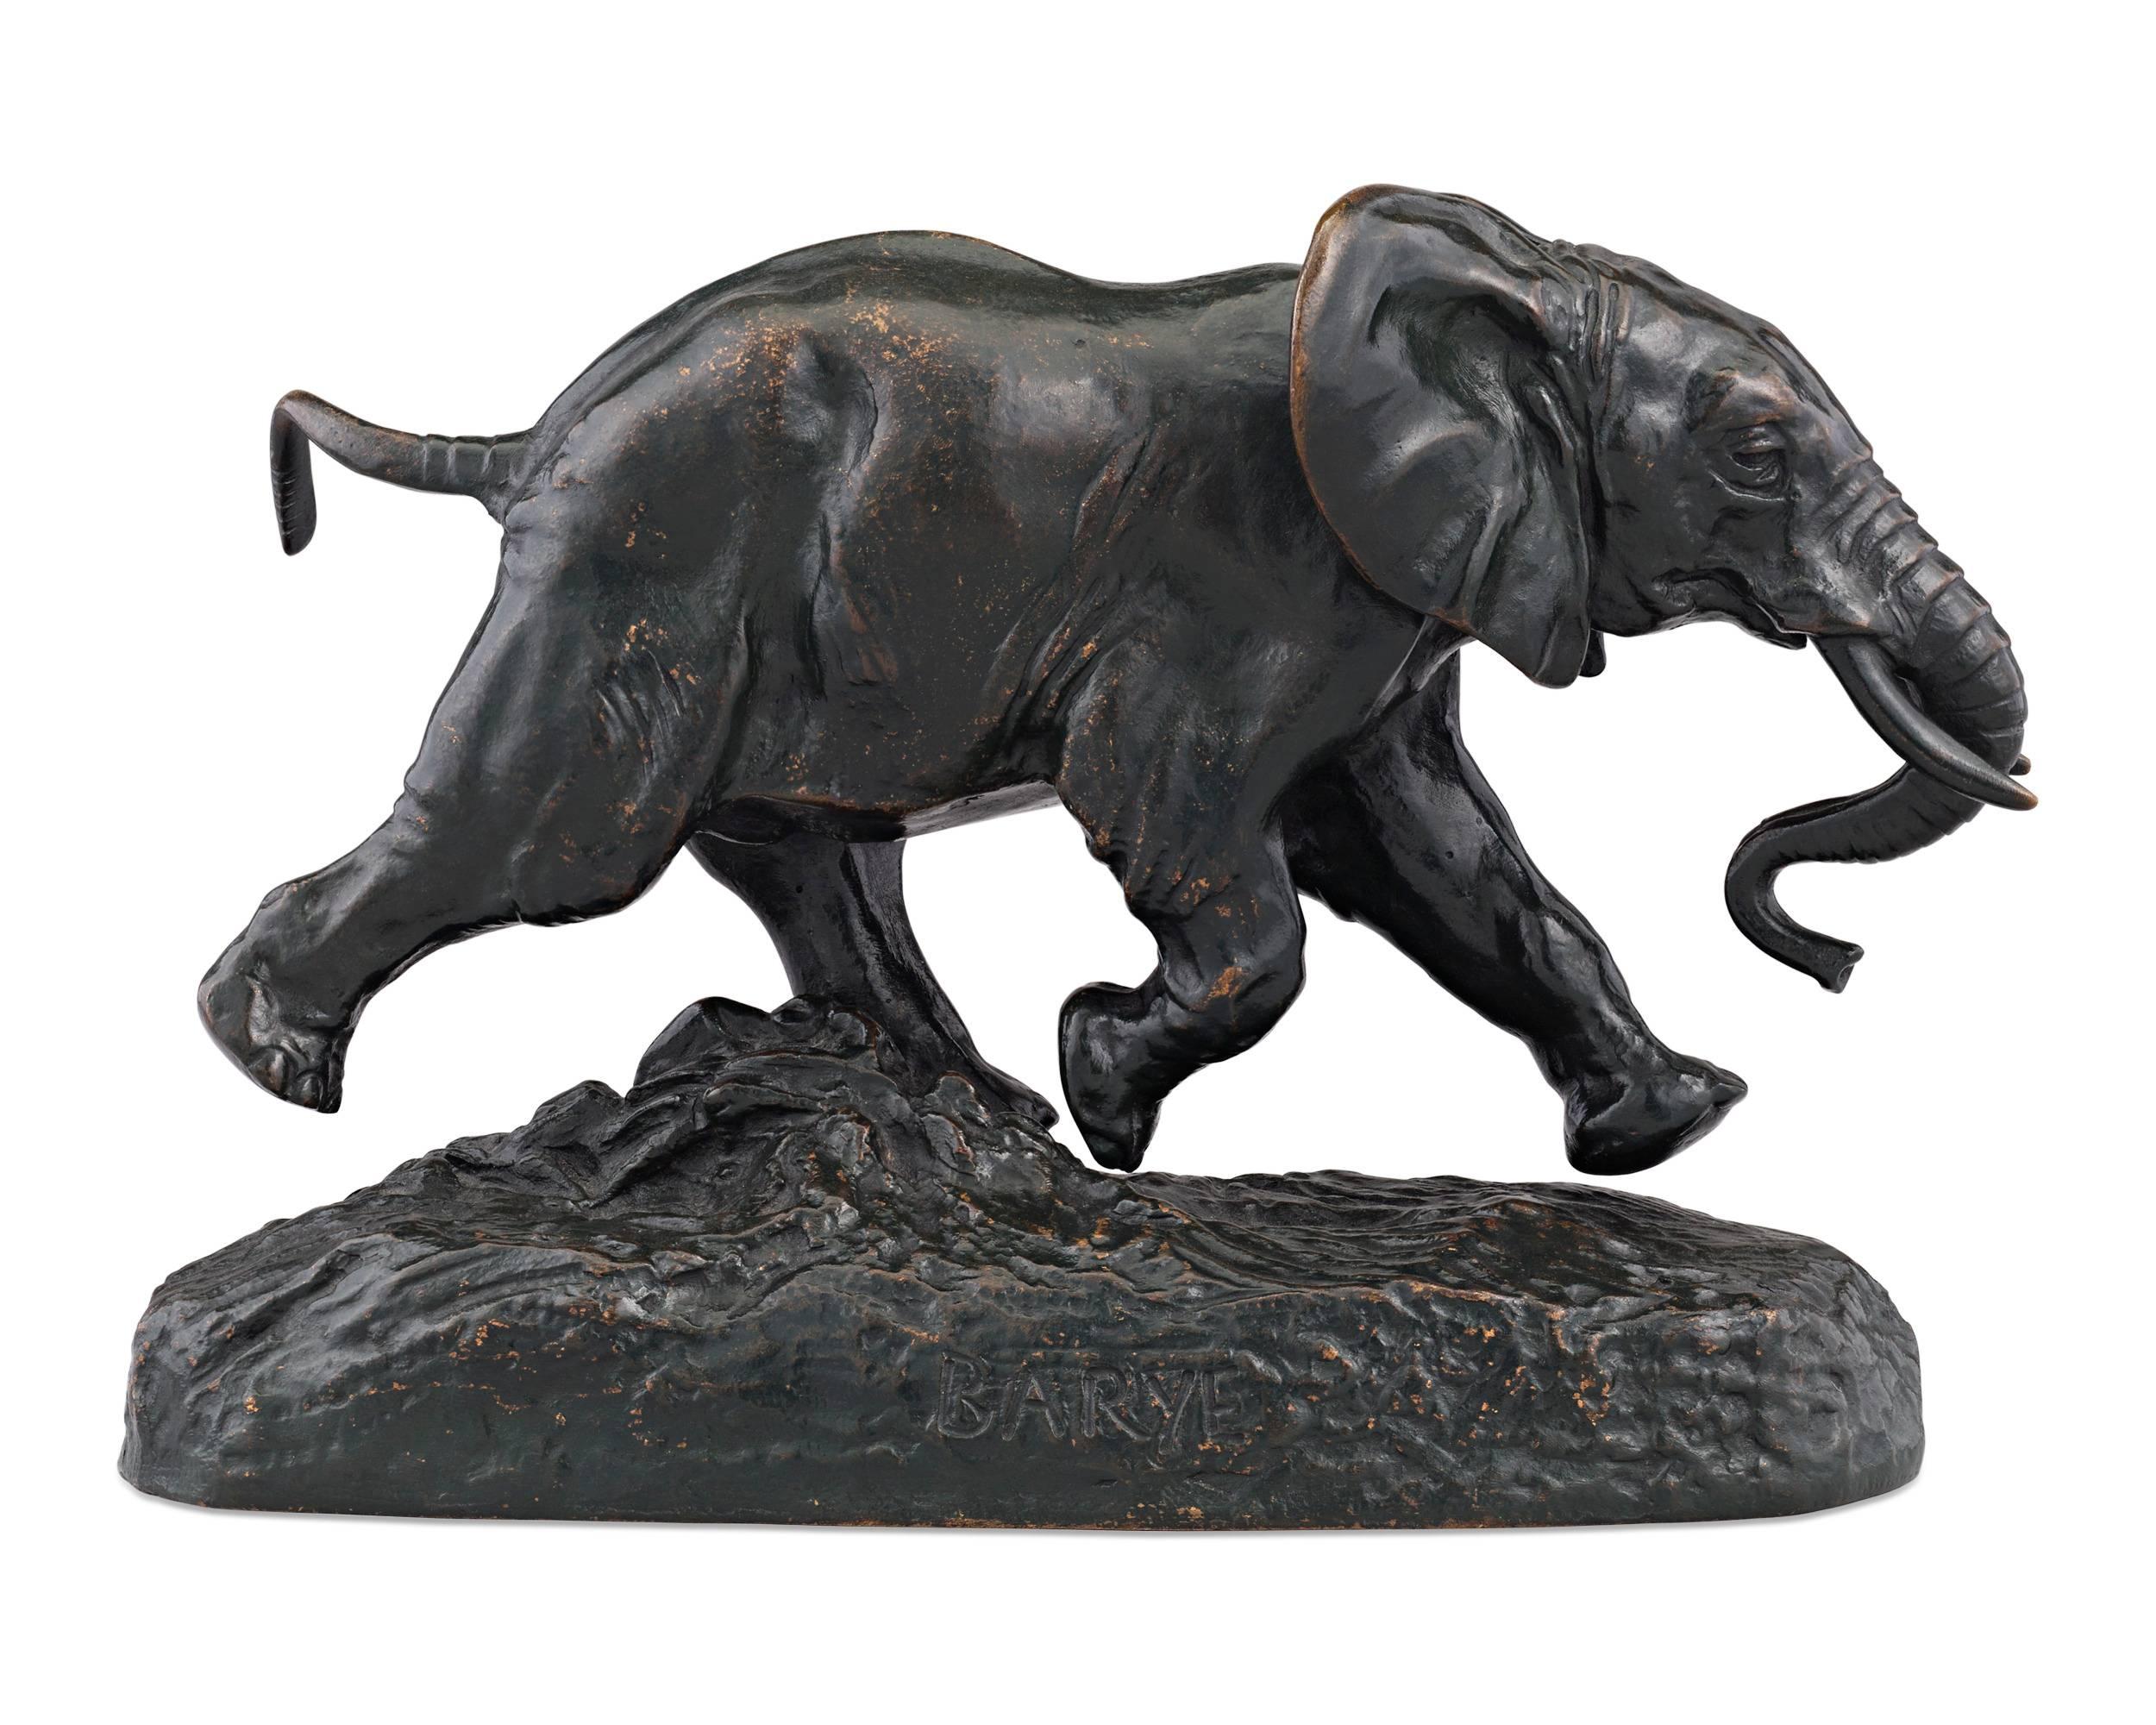 This important bronze sculpture of an African elephant by Romantic artist Antoine-Louis Barye (1796-1875) displays the remarkable realism for which Barye is best remembered. Entitled Senegalese Elephant Barye's interpretation of this majestic